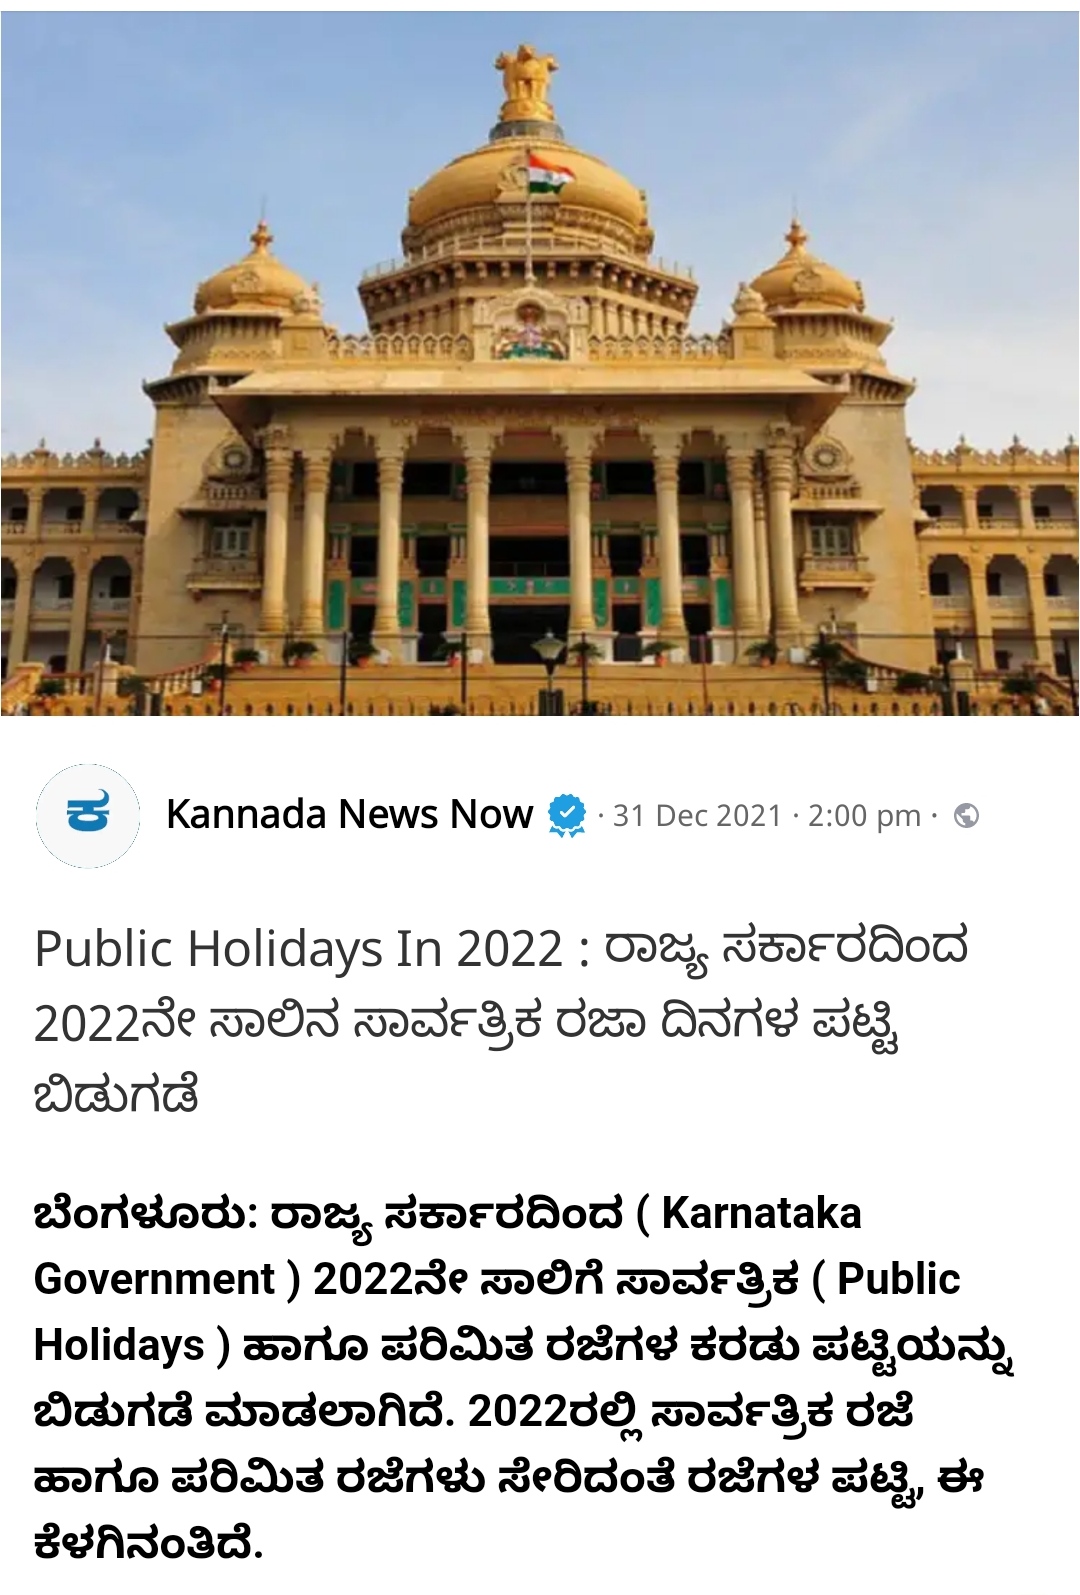 Public Holidays In 2022: Releases 2022 General Holidays List by State Government